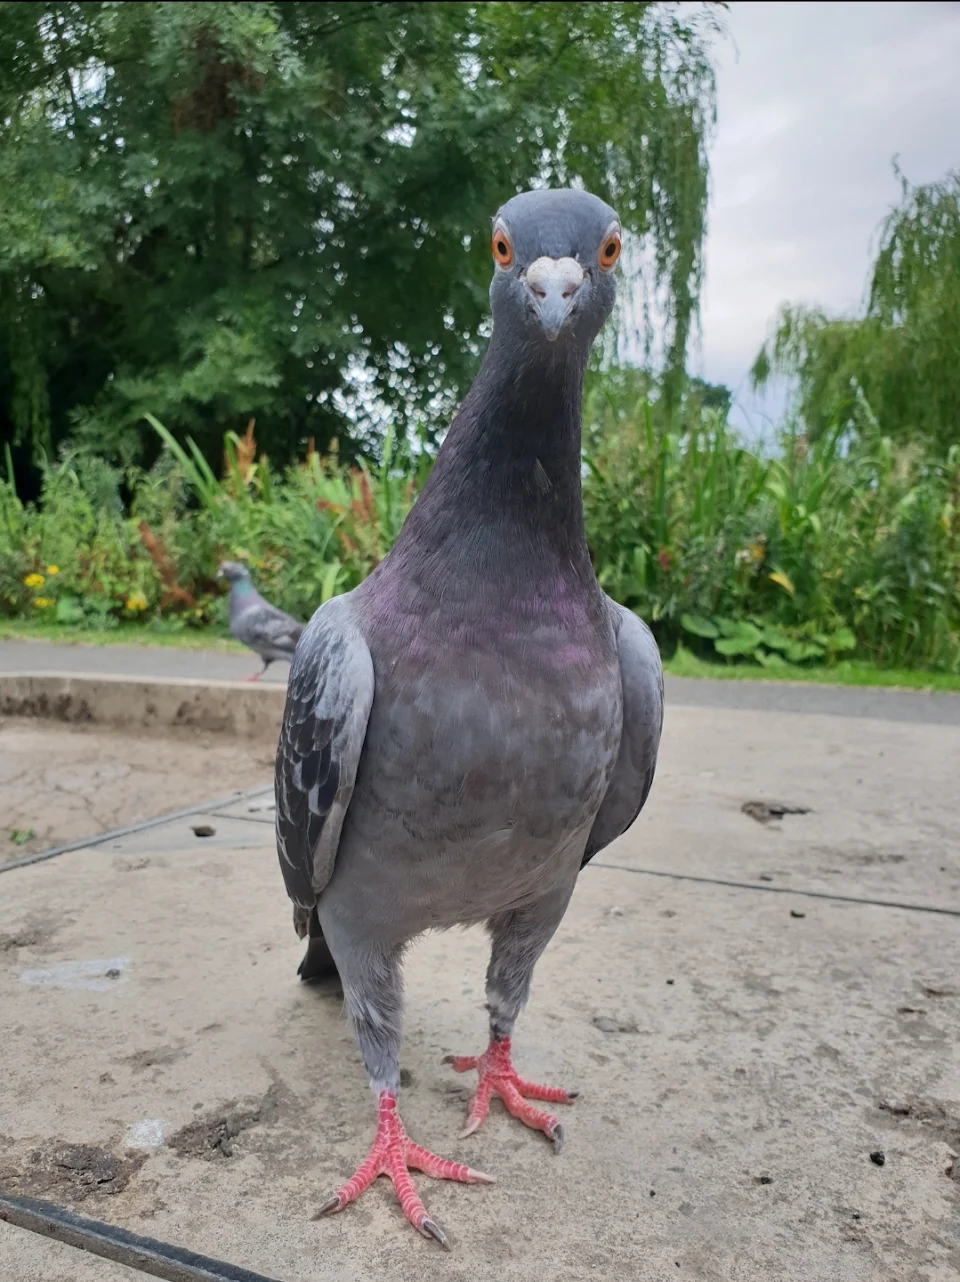 A curious pigeon I met in the park